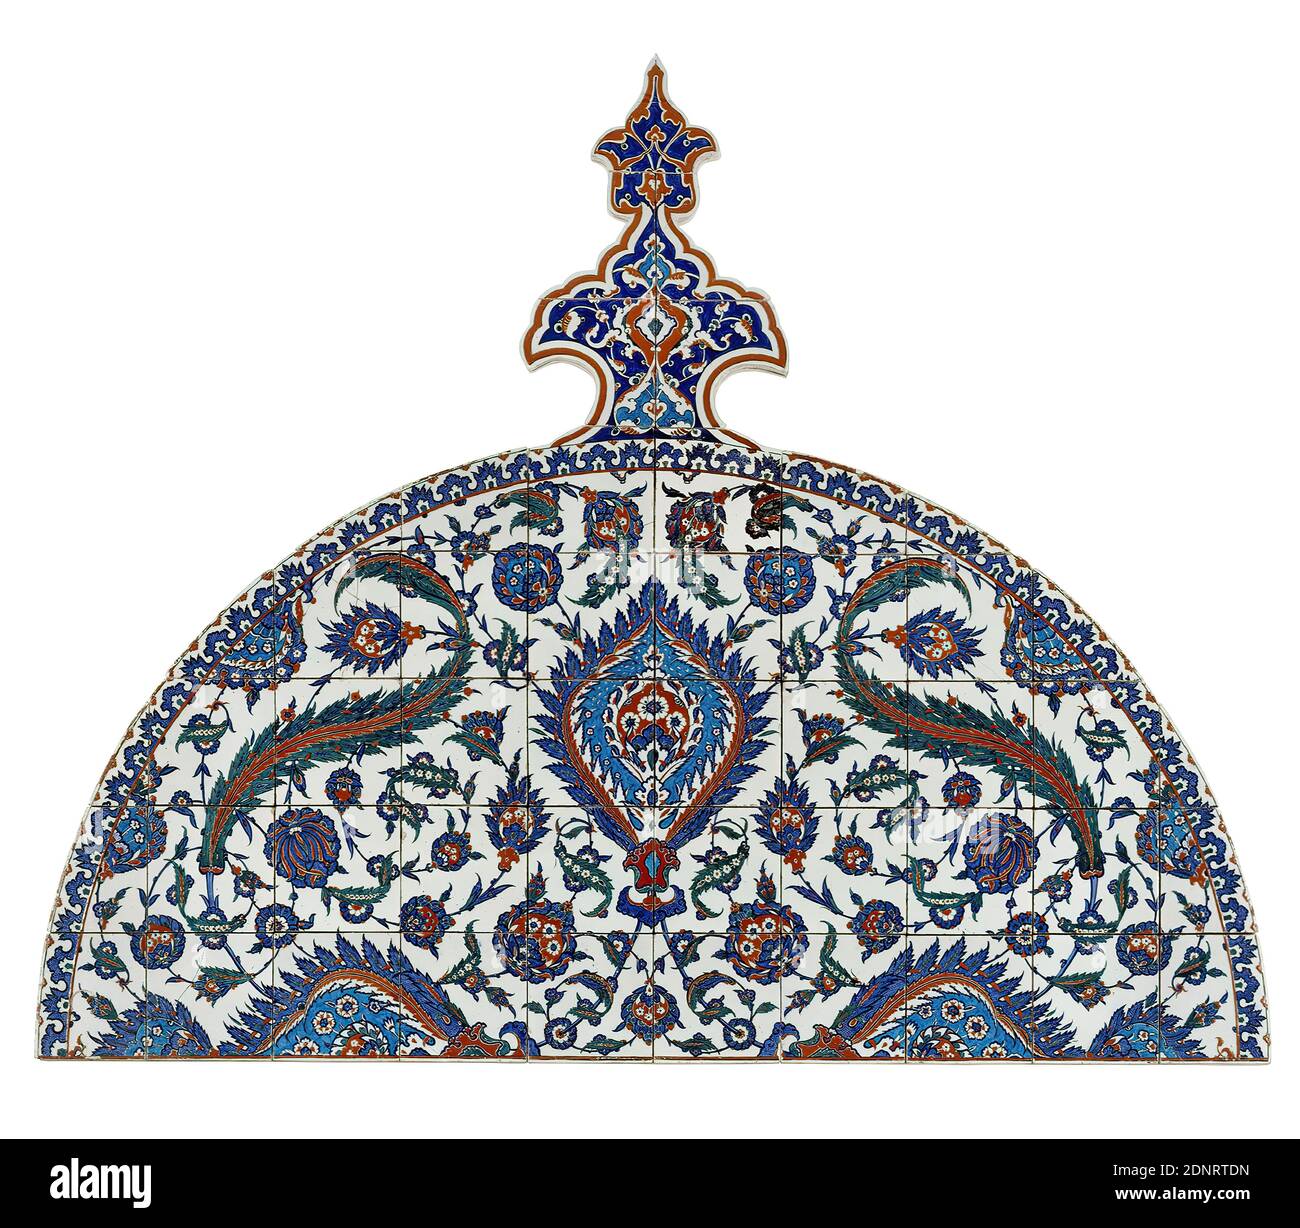 Tile arch, ceramics, underglazed decoration, Total: Height: 170.00 cm; Width: 230.00 cm, architectural decoration, ceramics, plant ornaments, The Iznik ceramics is famous for its bright colors. The plant decoration combines fantasy and observation of nature. The arch probably comes from the building complex of the Piyale Pasha Mosque of Sinan in Istanbul Stock Photo